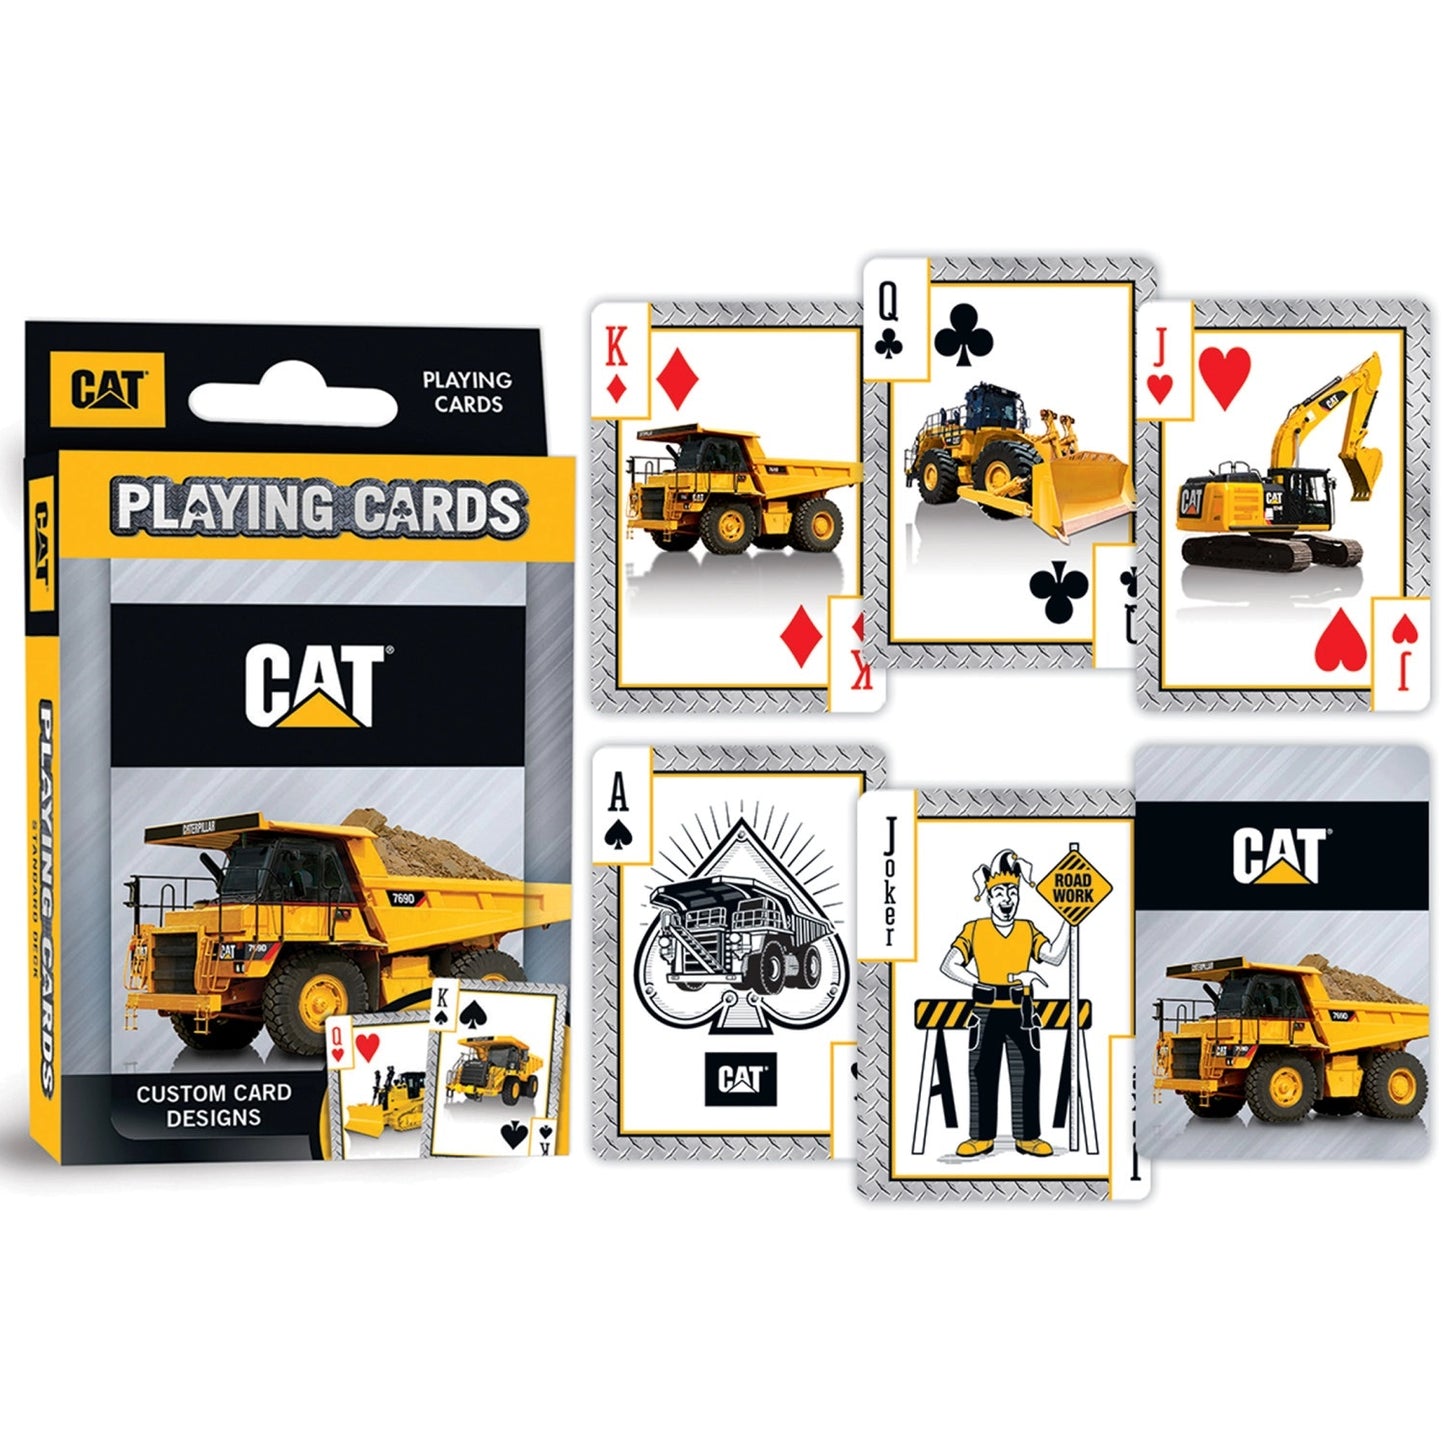 CAT Caterpillar Playing Cards - Officially Licensed